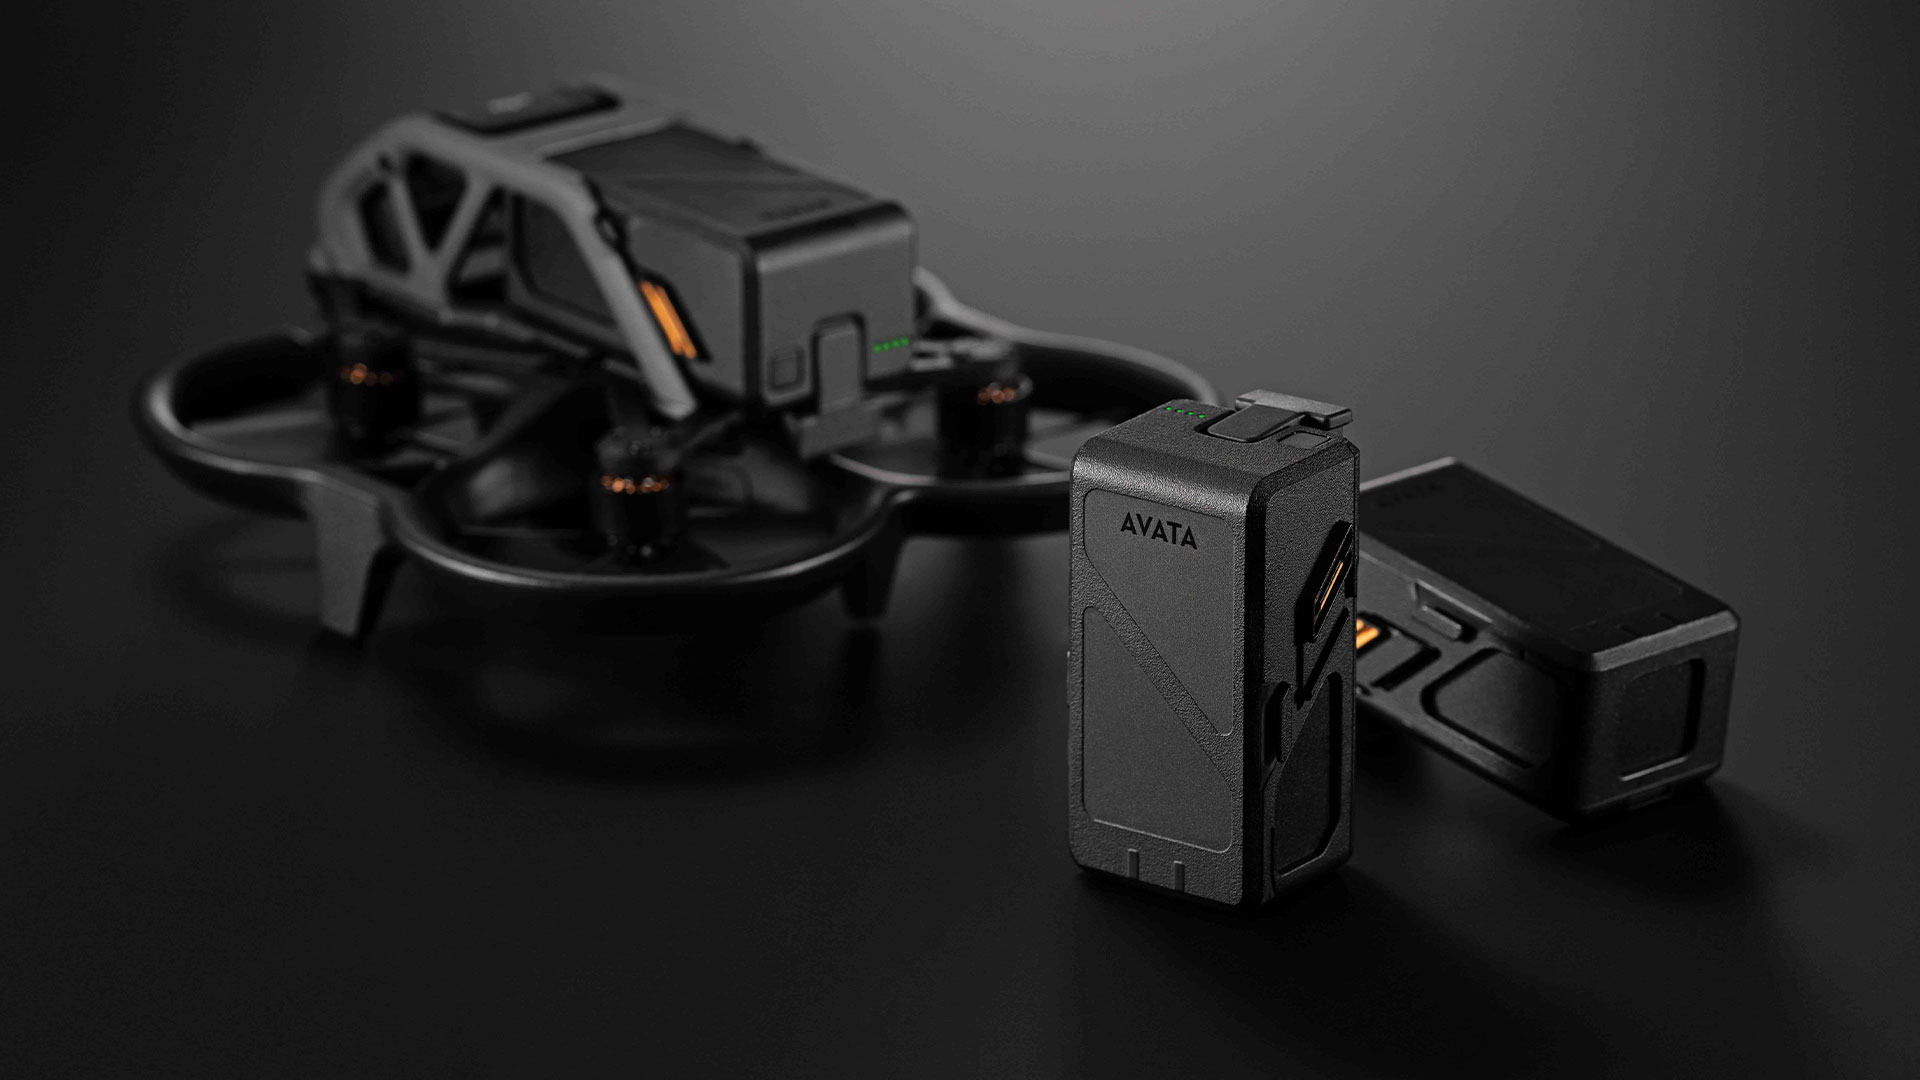 DJI Avata Camera Drone Review: How Does It Compare to a Cinewhoop